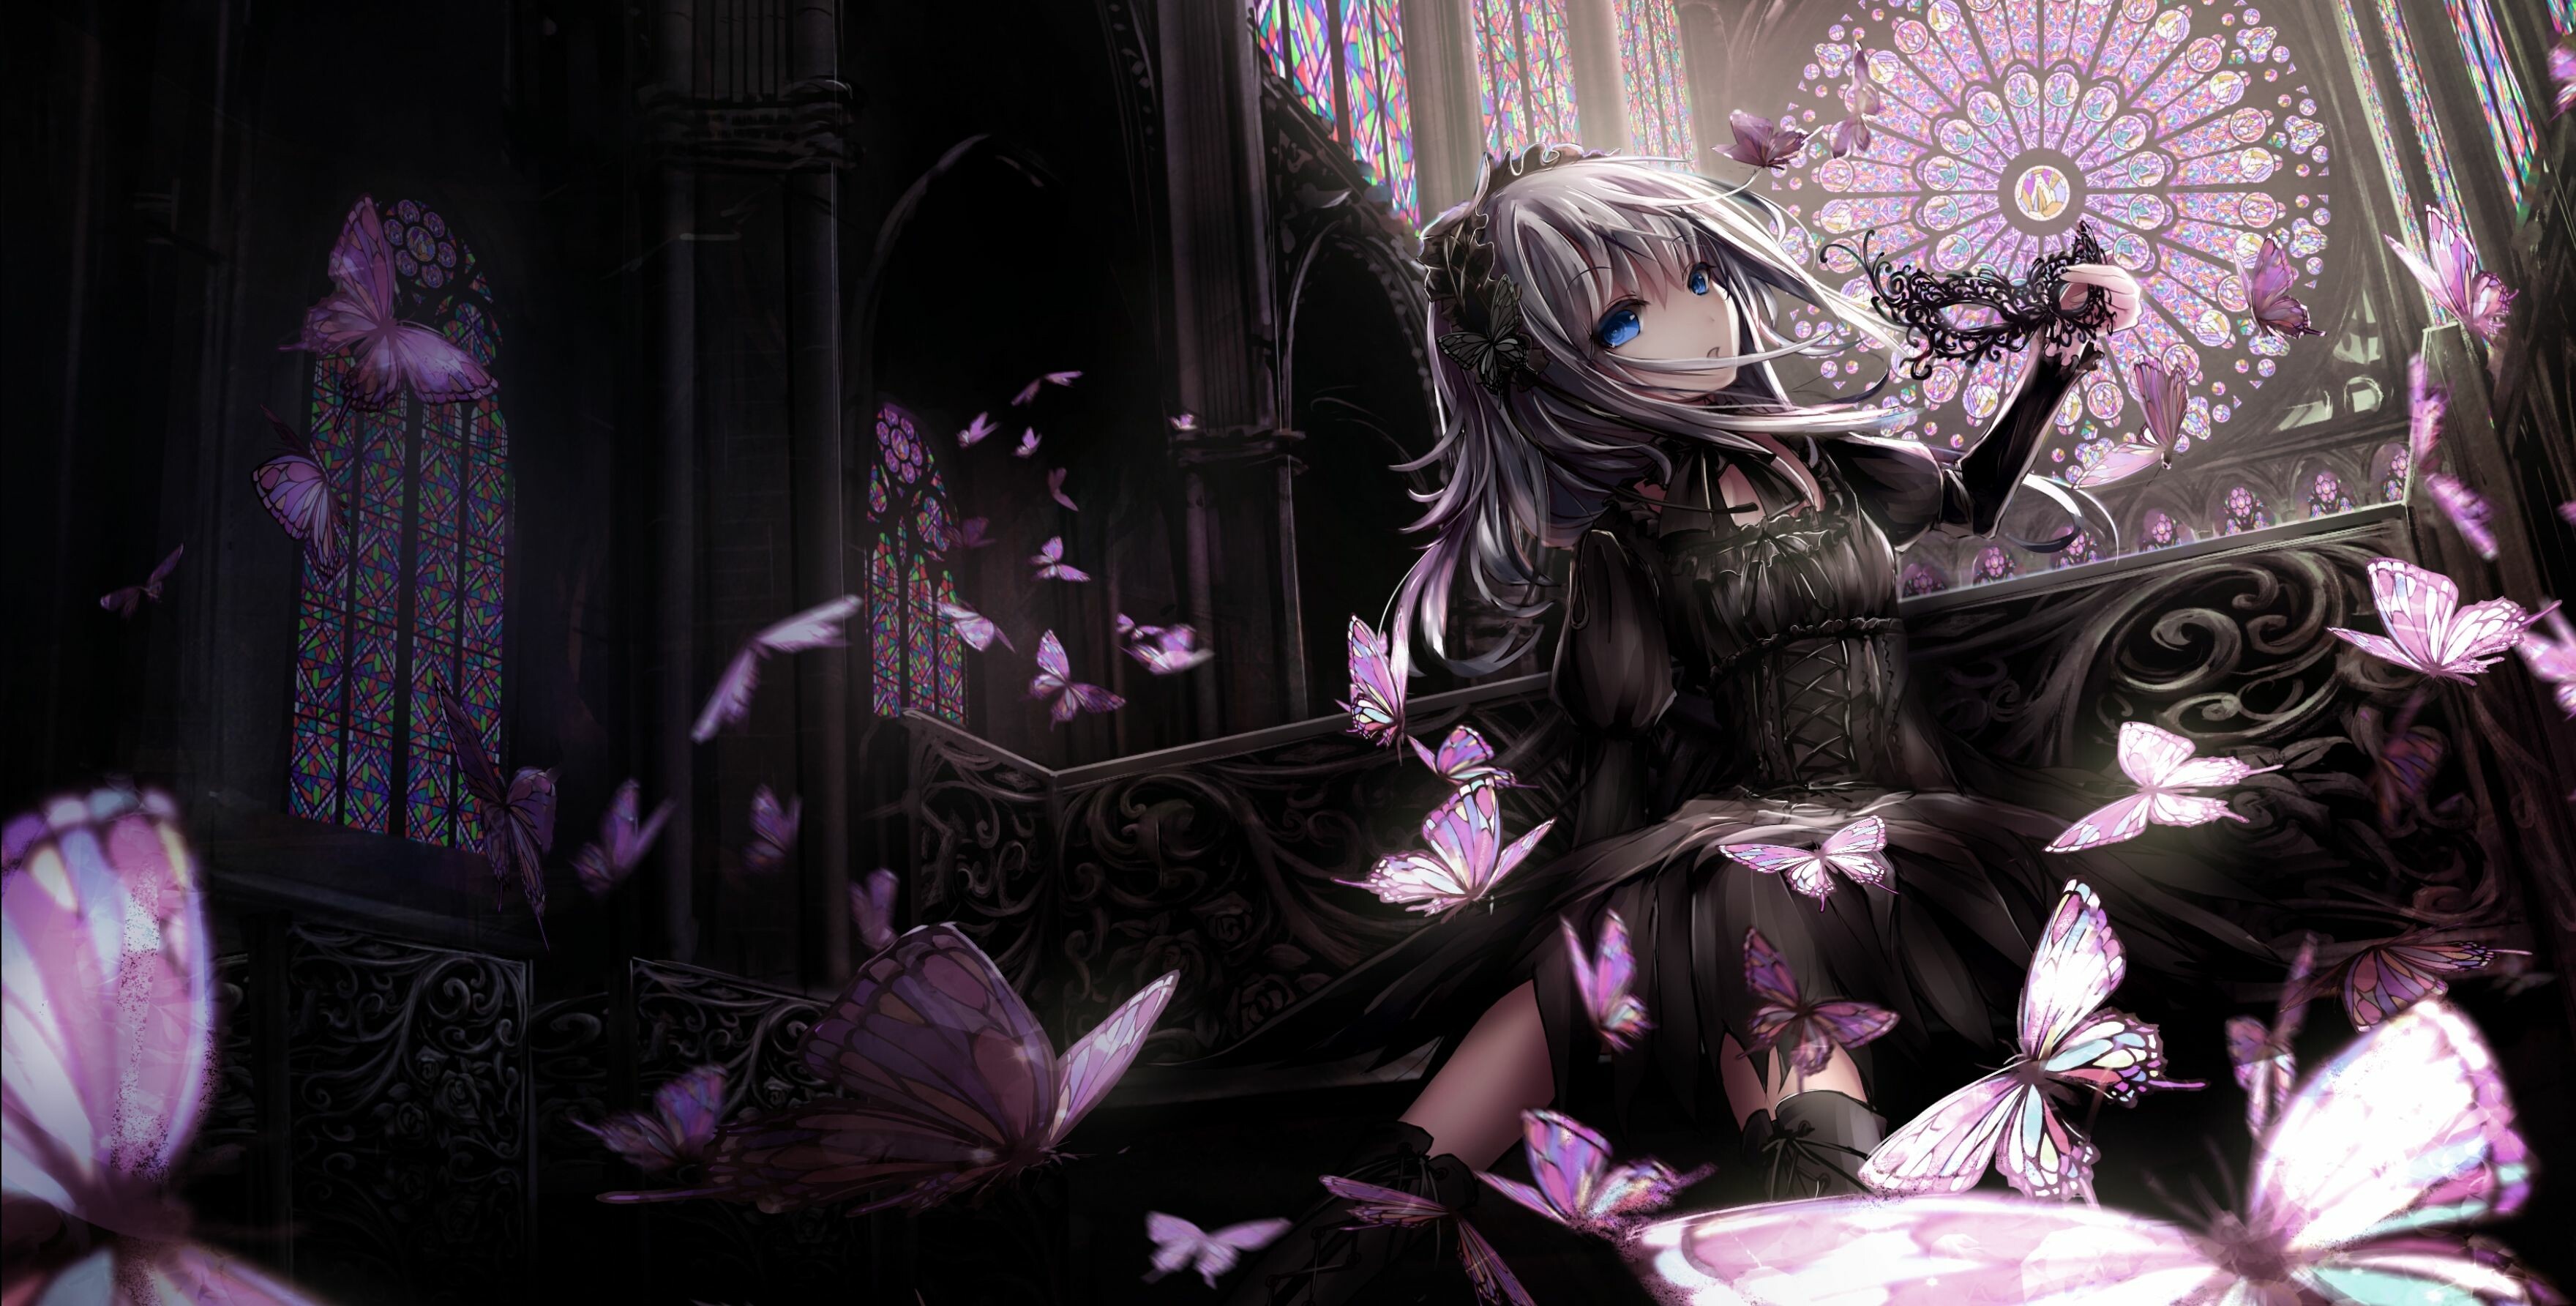 Gothic Anime Wallpaper: HD, 4K, 5K for PC and Mobile. Download free image for iPhone, Android